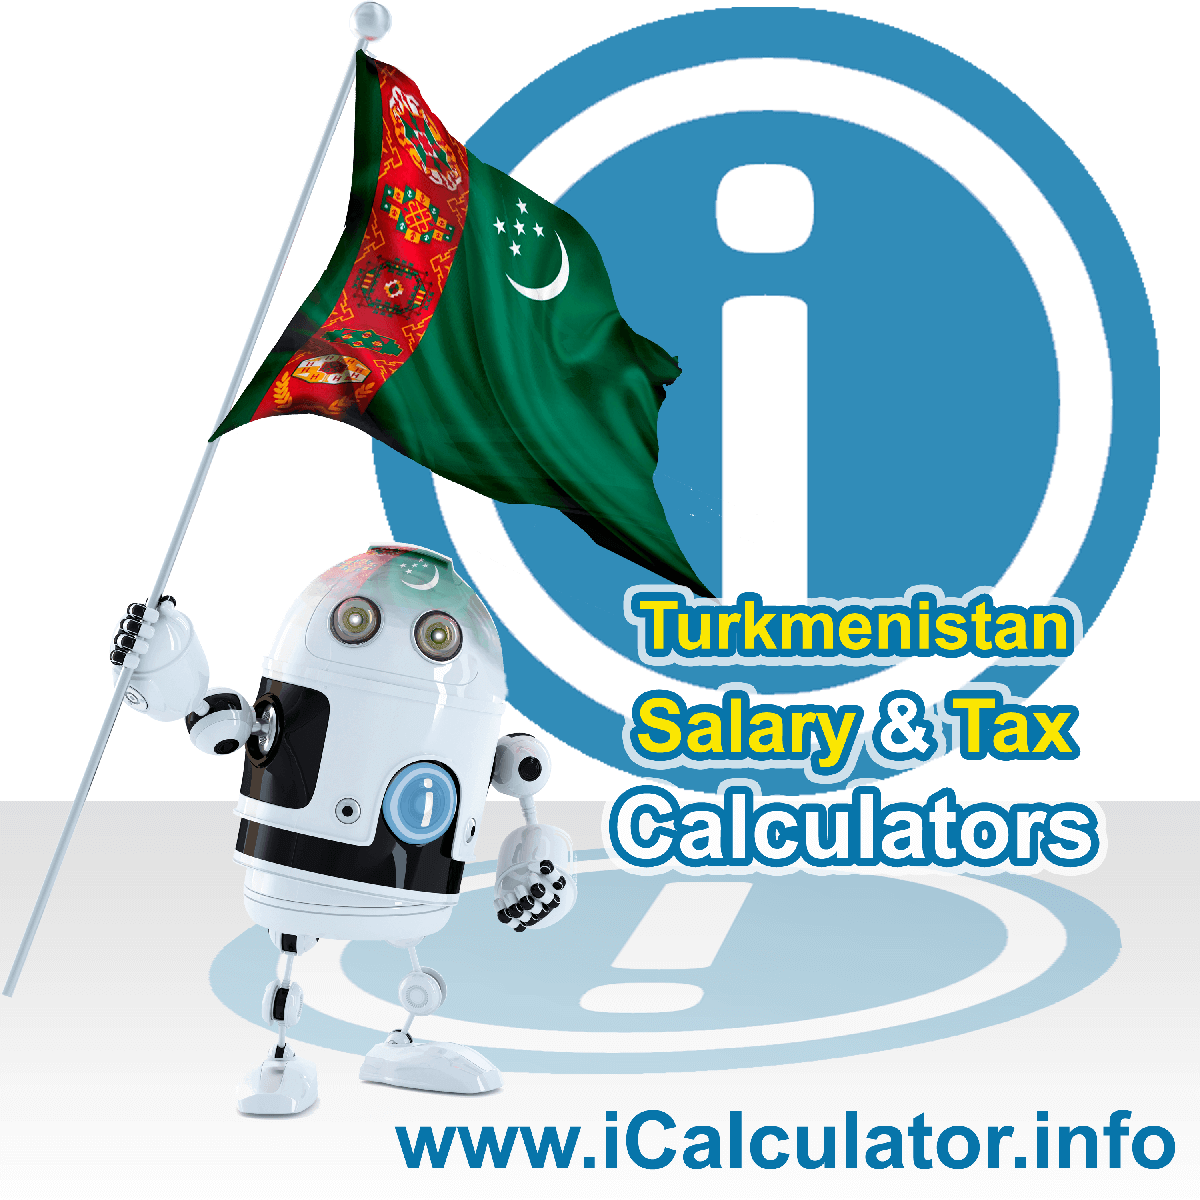 Turkmenistan Salary Calculator. This image shows the Turkmenistanese flag and information relating to the tax formula for the Turkmenistan Tax Calculator